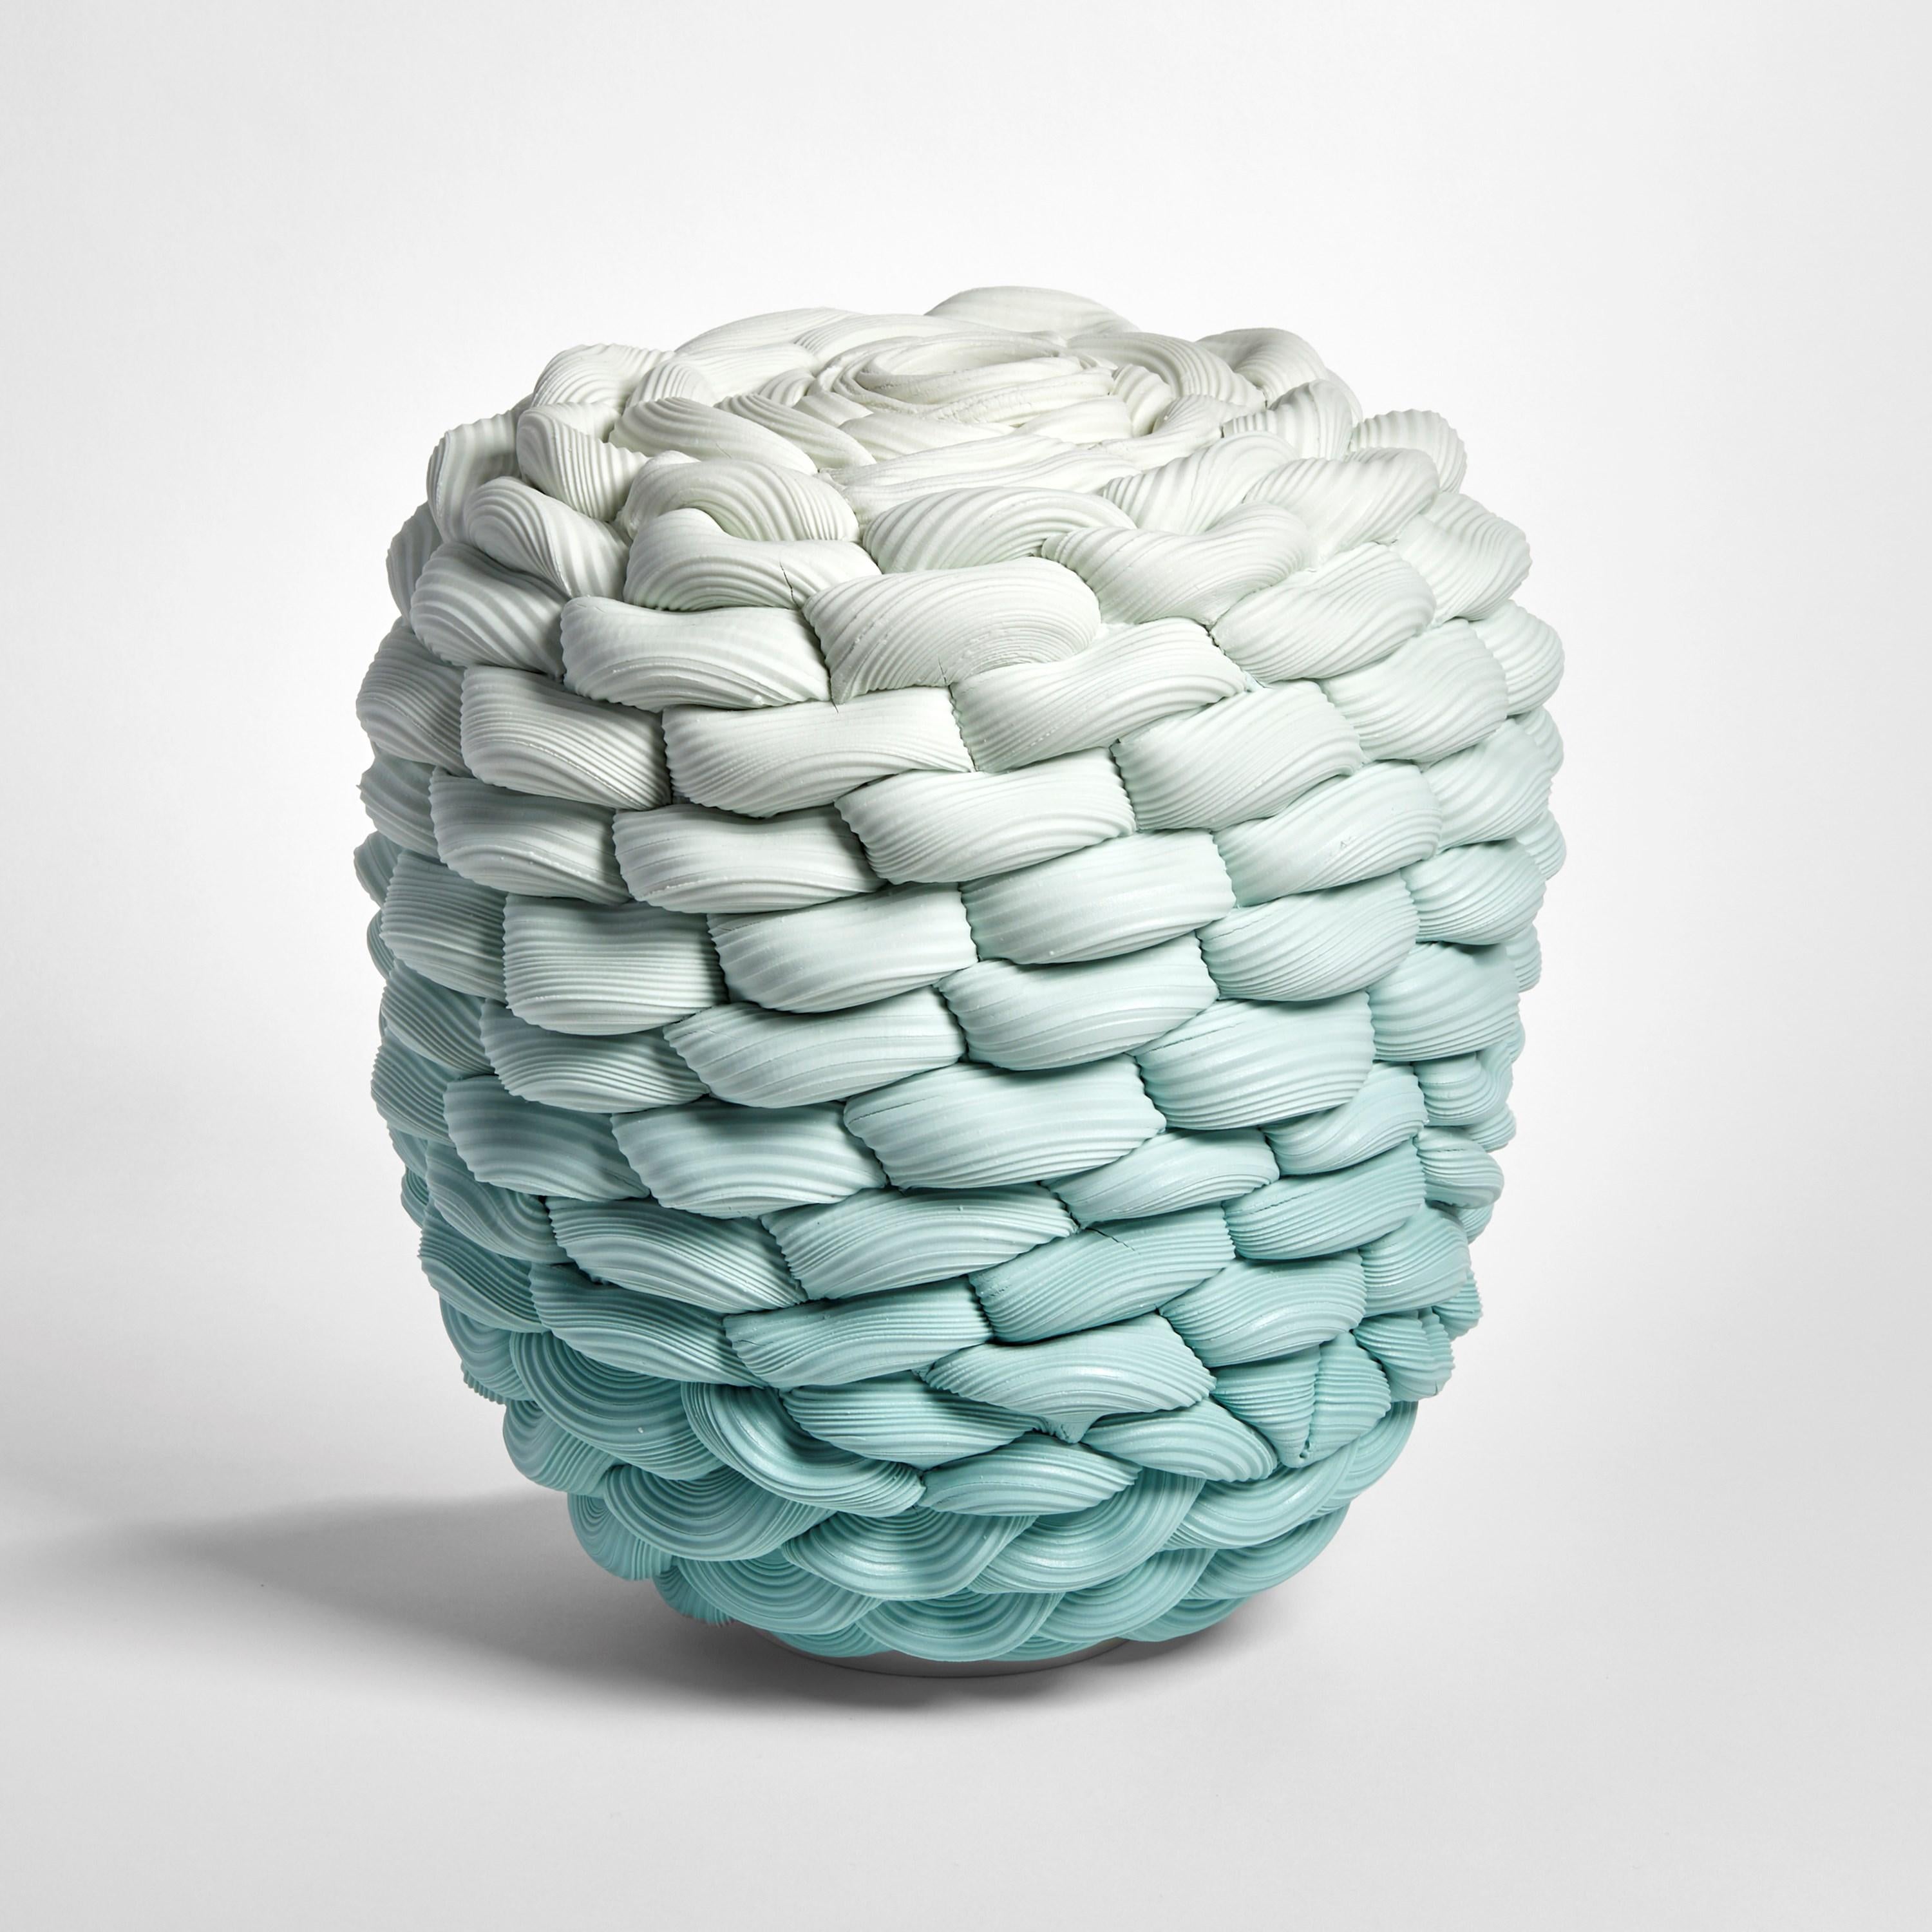 Hand-Crafted Monochromatic Fold III, Teal & White Parian Porcelain Vessel by Steven Edwards